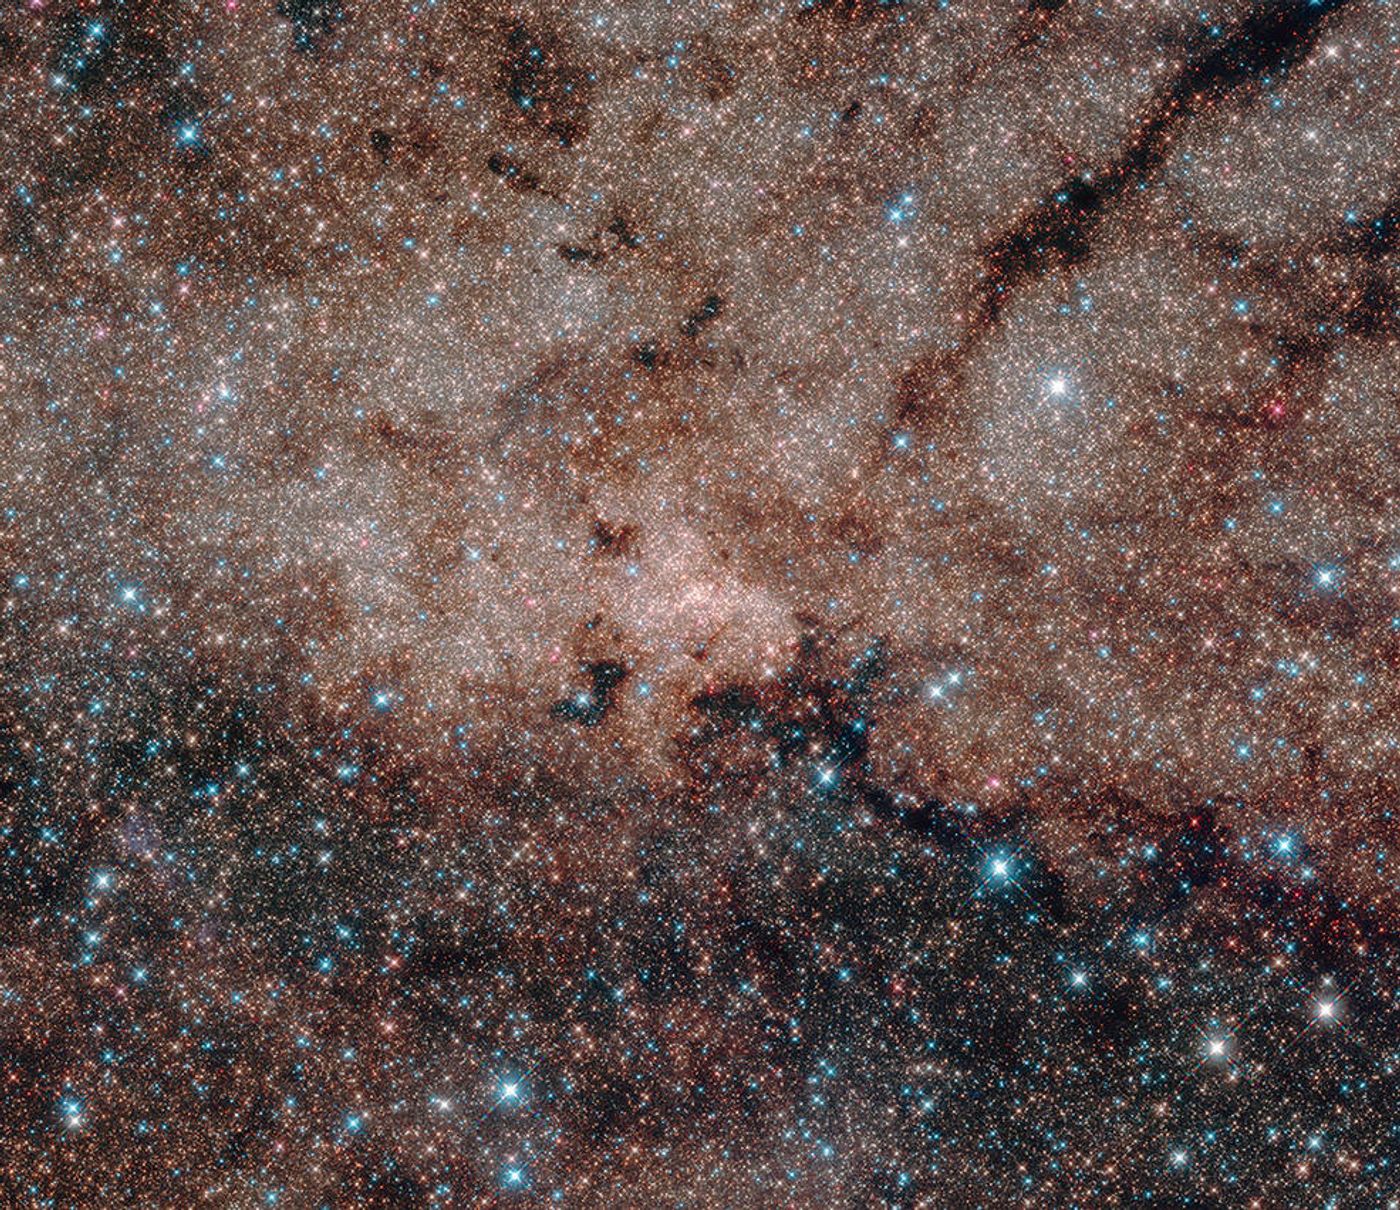 NASA captured a wide range spanning 50 light years across using the Hubble Space Telescope and hopes to learn more about the center of the Milky Way from it.